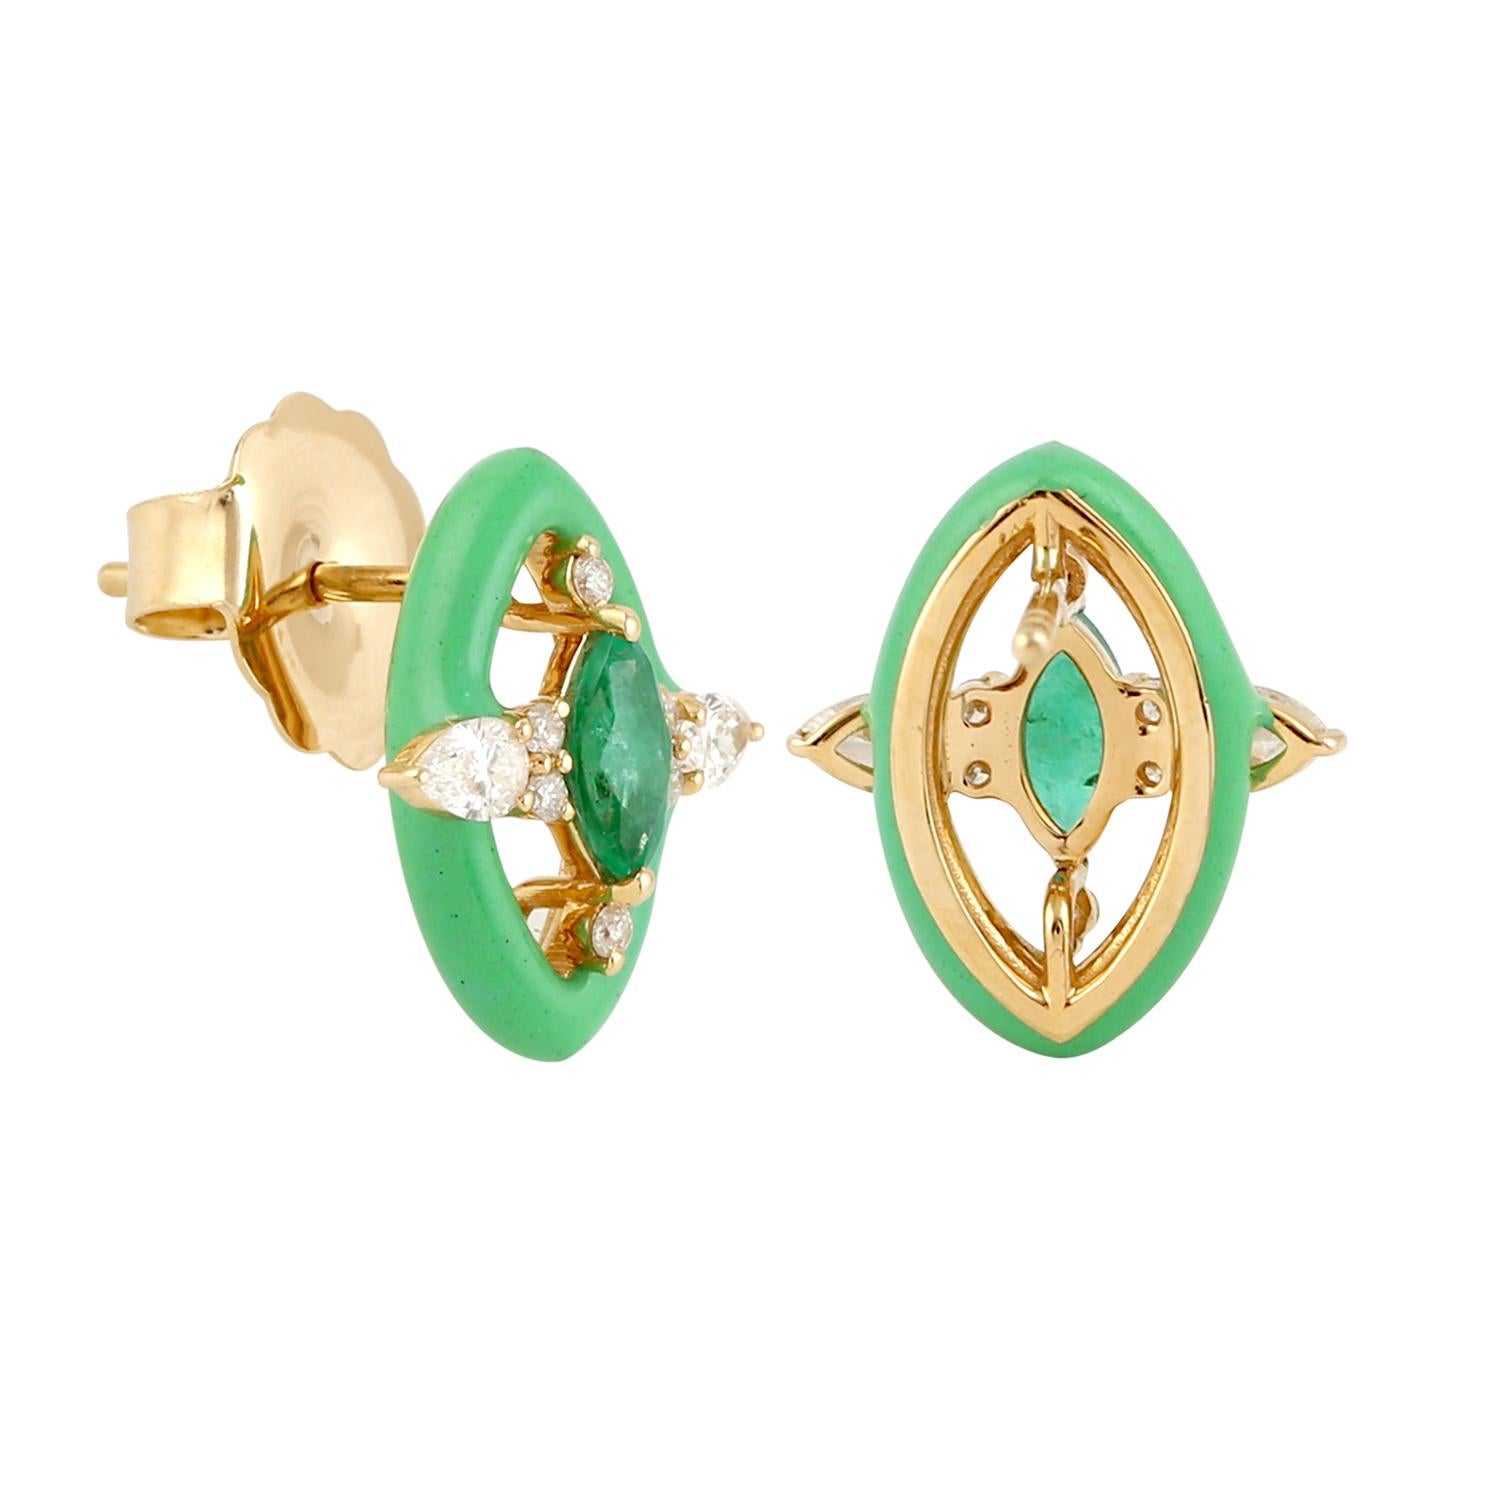 These enamel earrings are crafted from 14-karat gold & set with .55 carats emerald and .46 carats of sparkling diamonds. Available in turquoise, red and white enamel. See matching ring part of this collection.

FOLLOW MEGHNA JEWELS storefront to